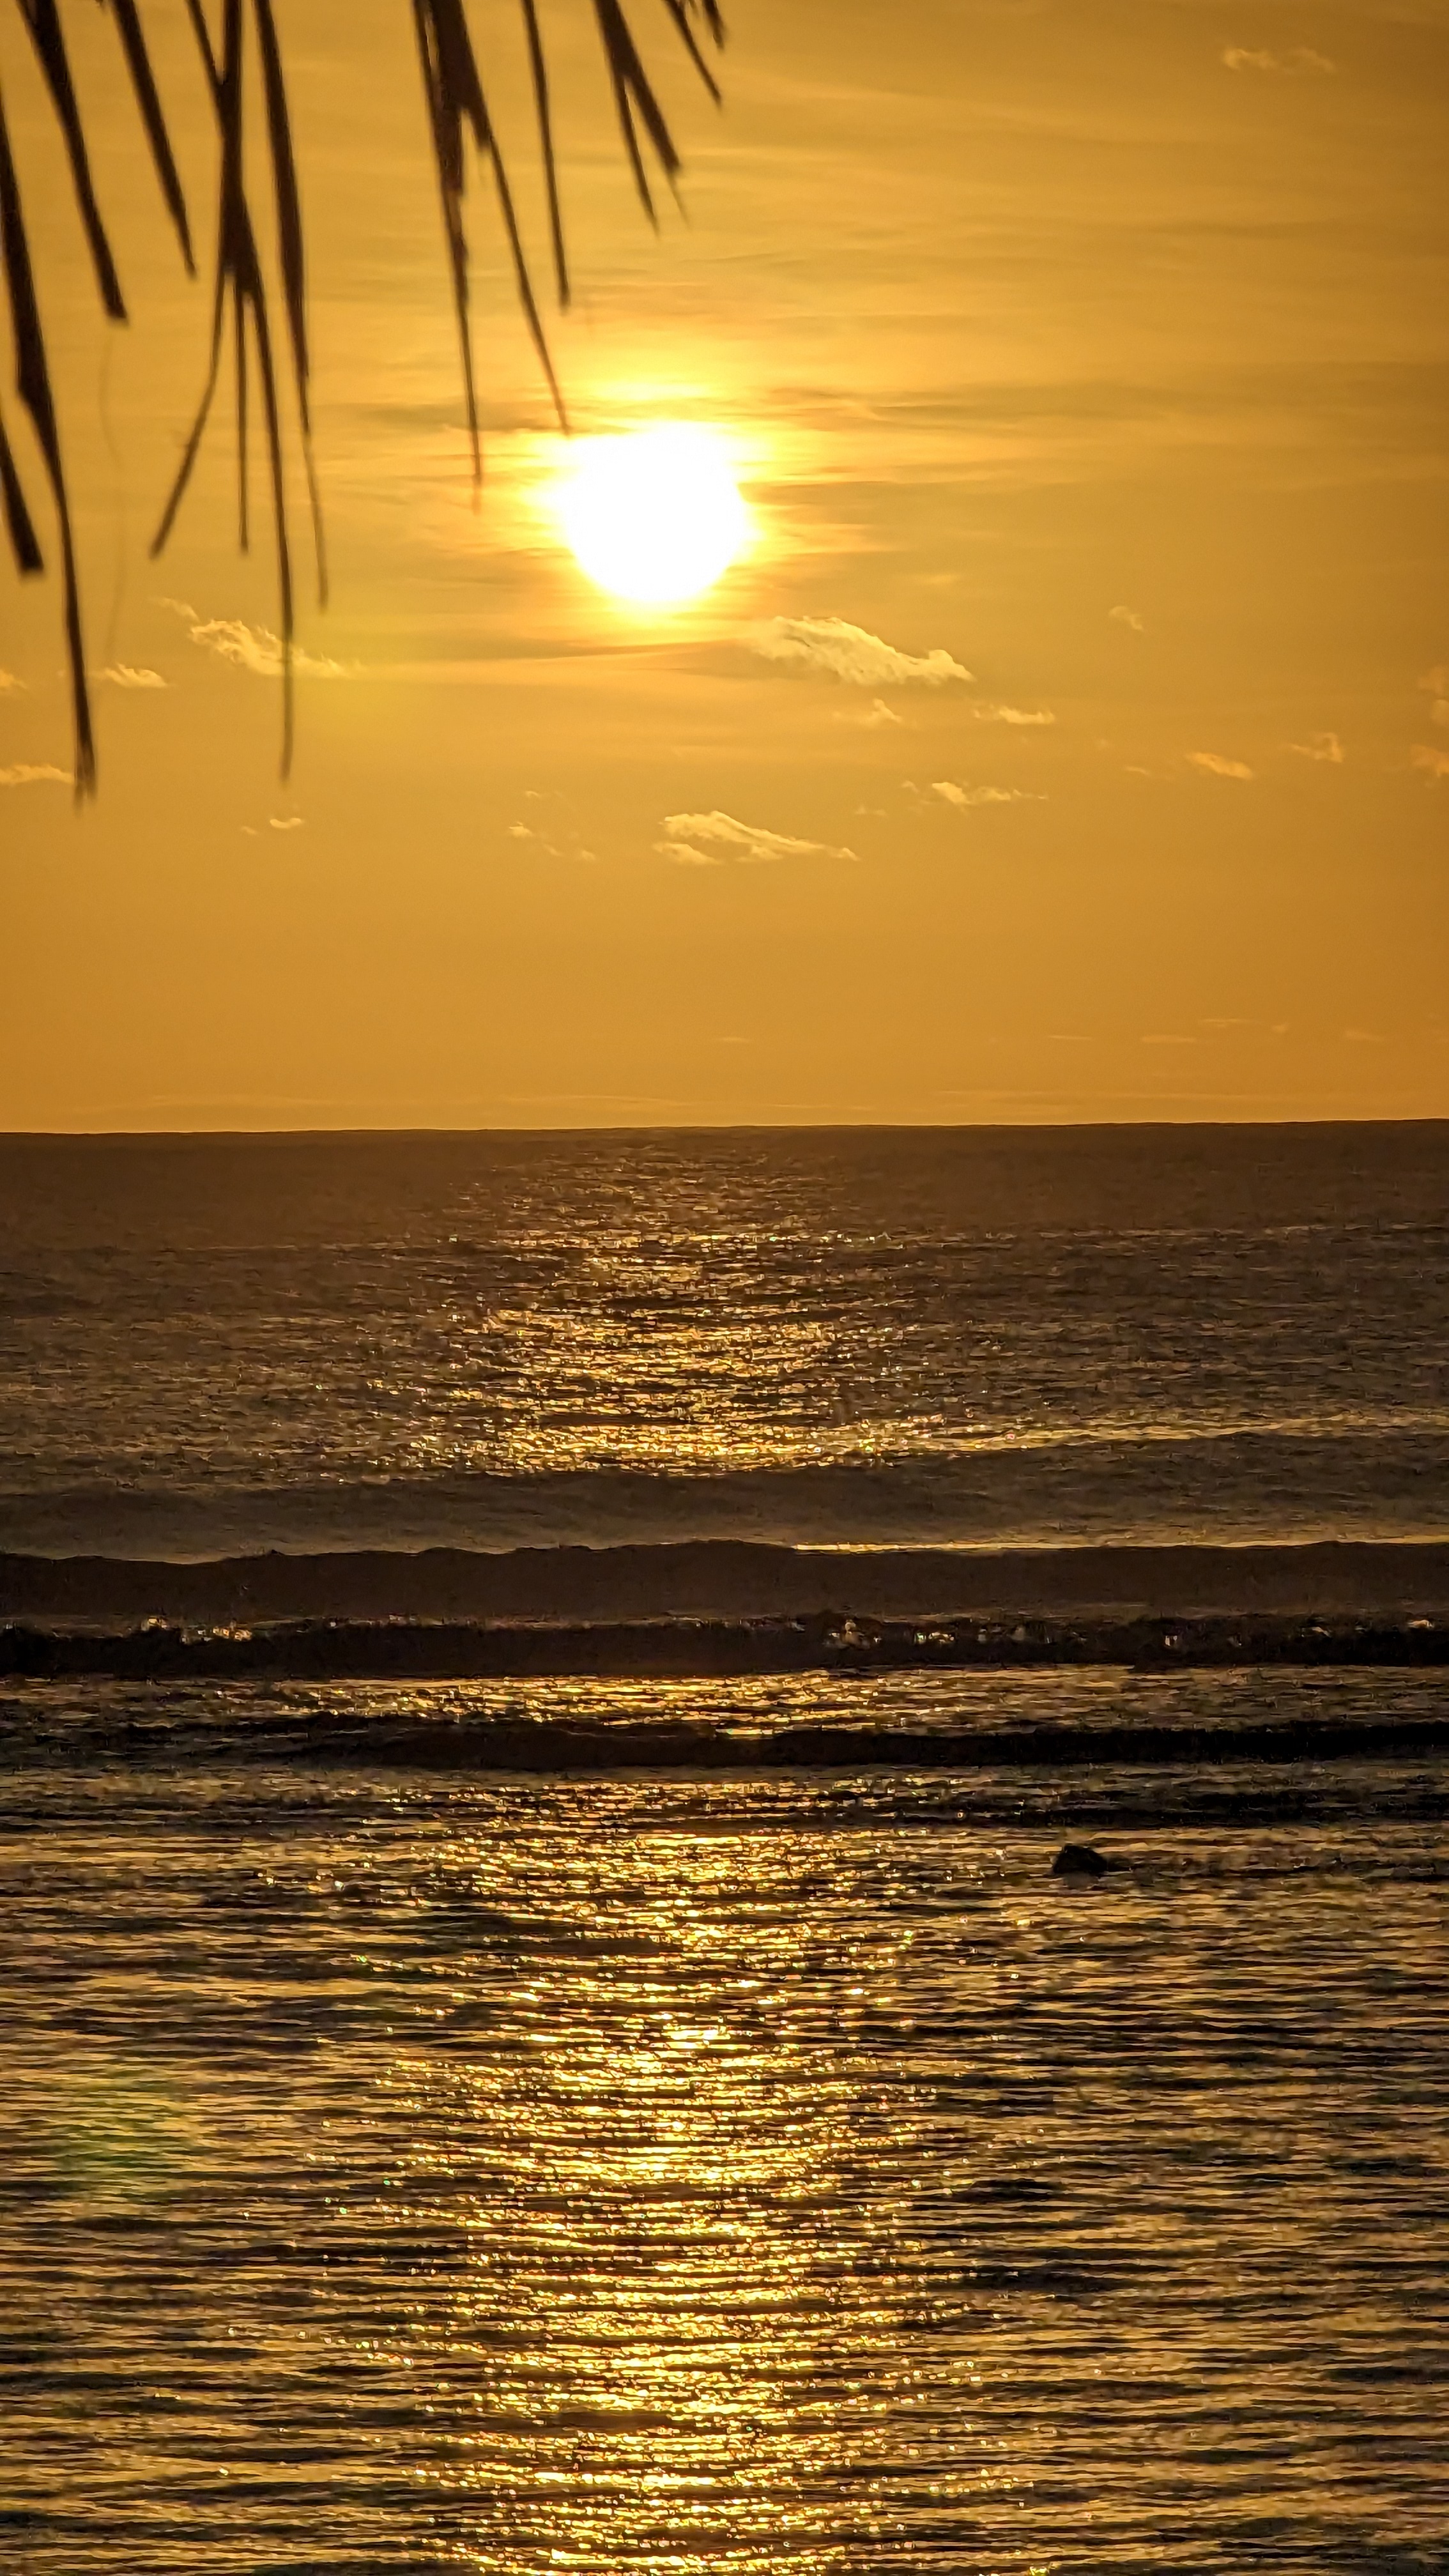 Sunset over a calm Pacific Ocean bathed in the golden sunlight